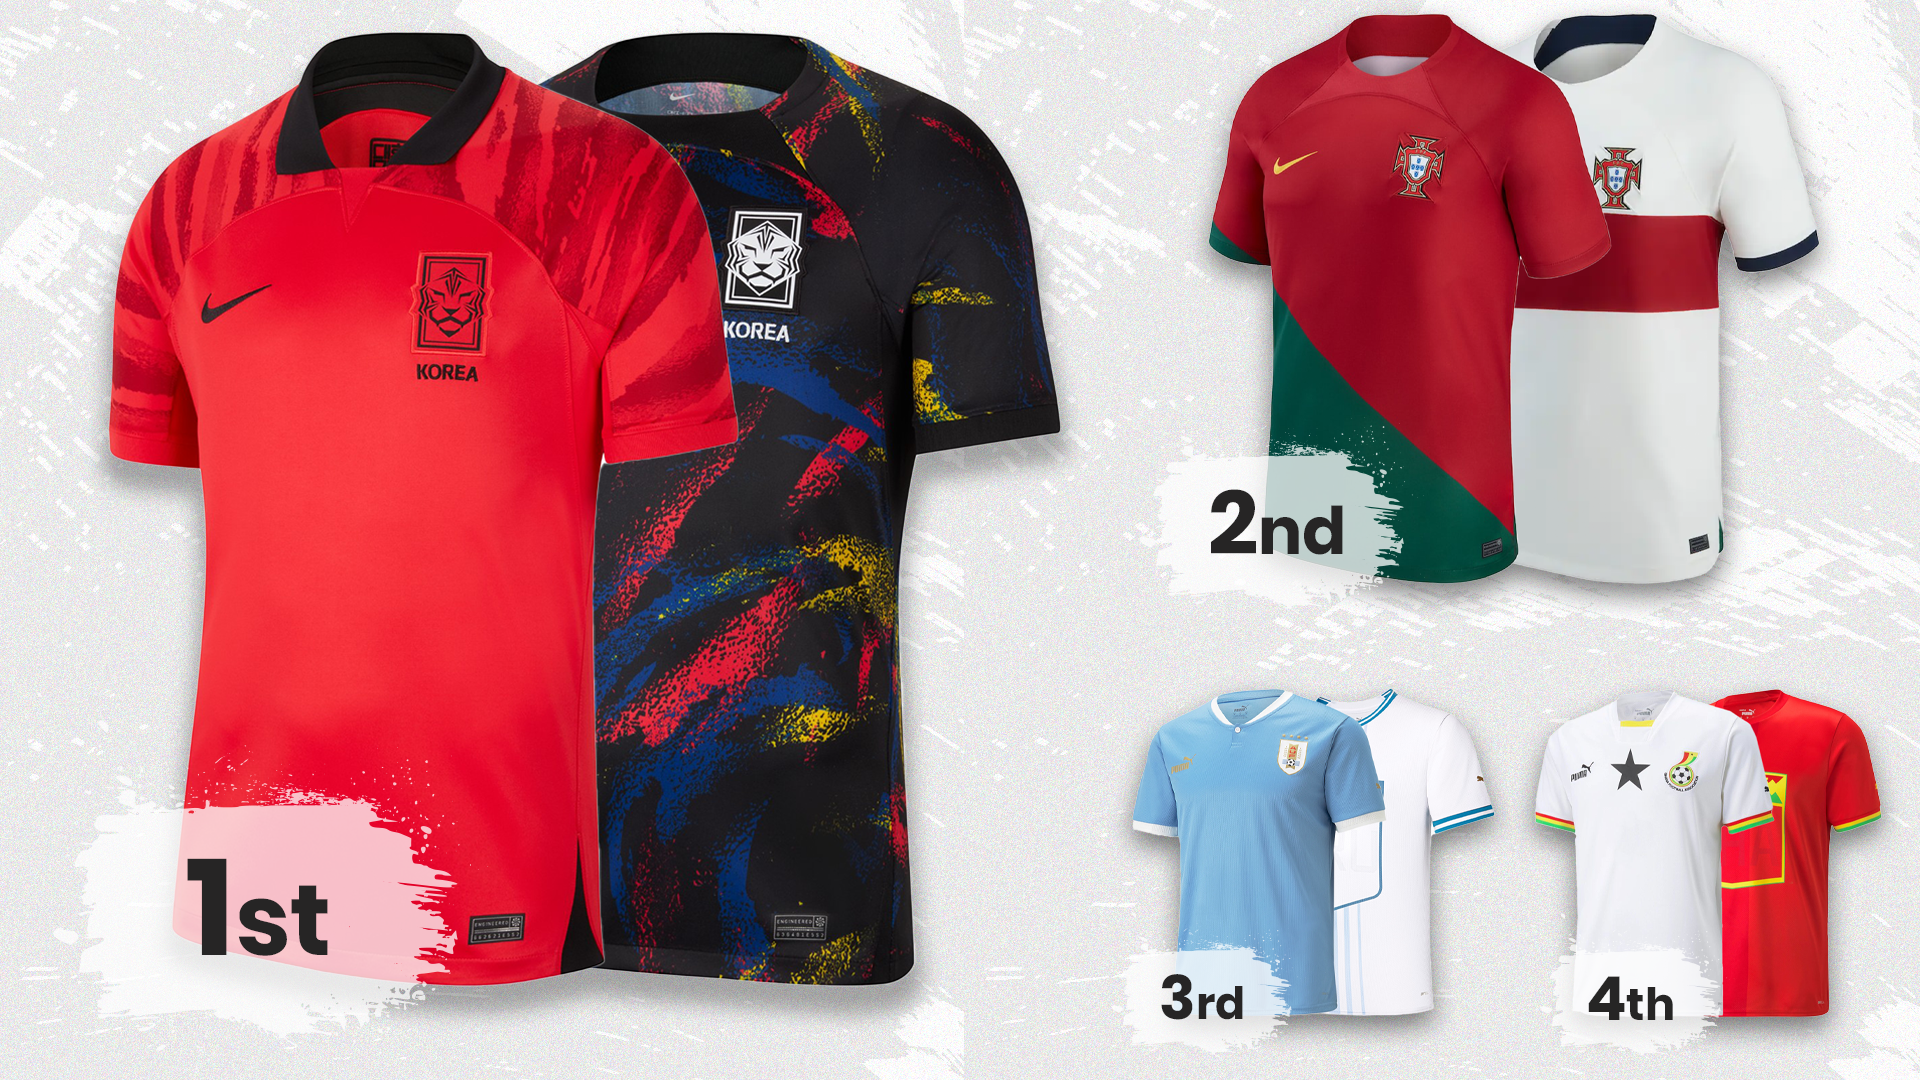 World Cup uniforms: A closer look at Group F's kits